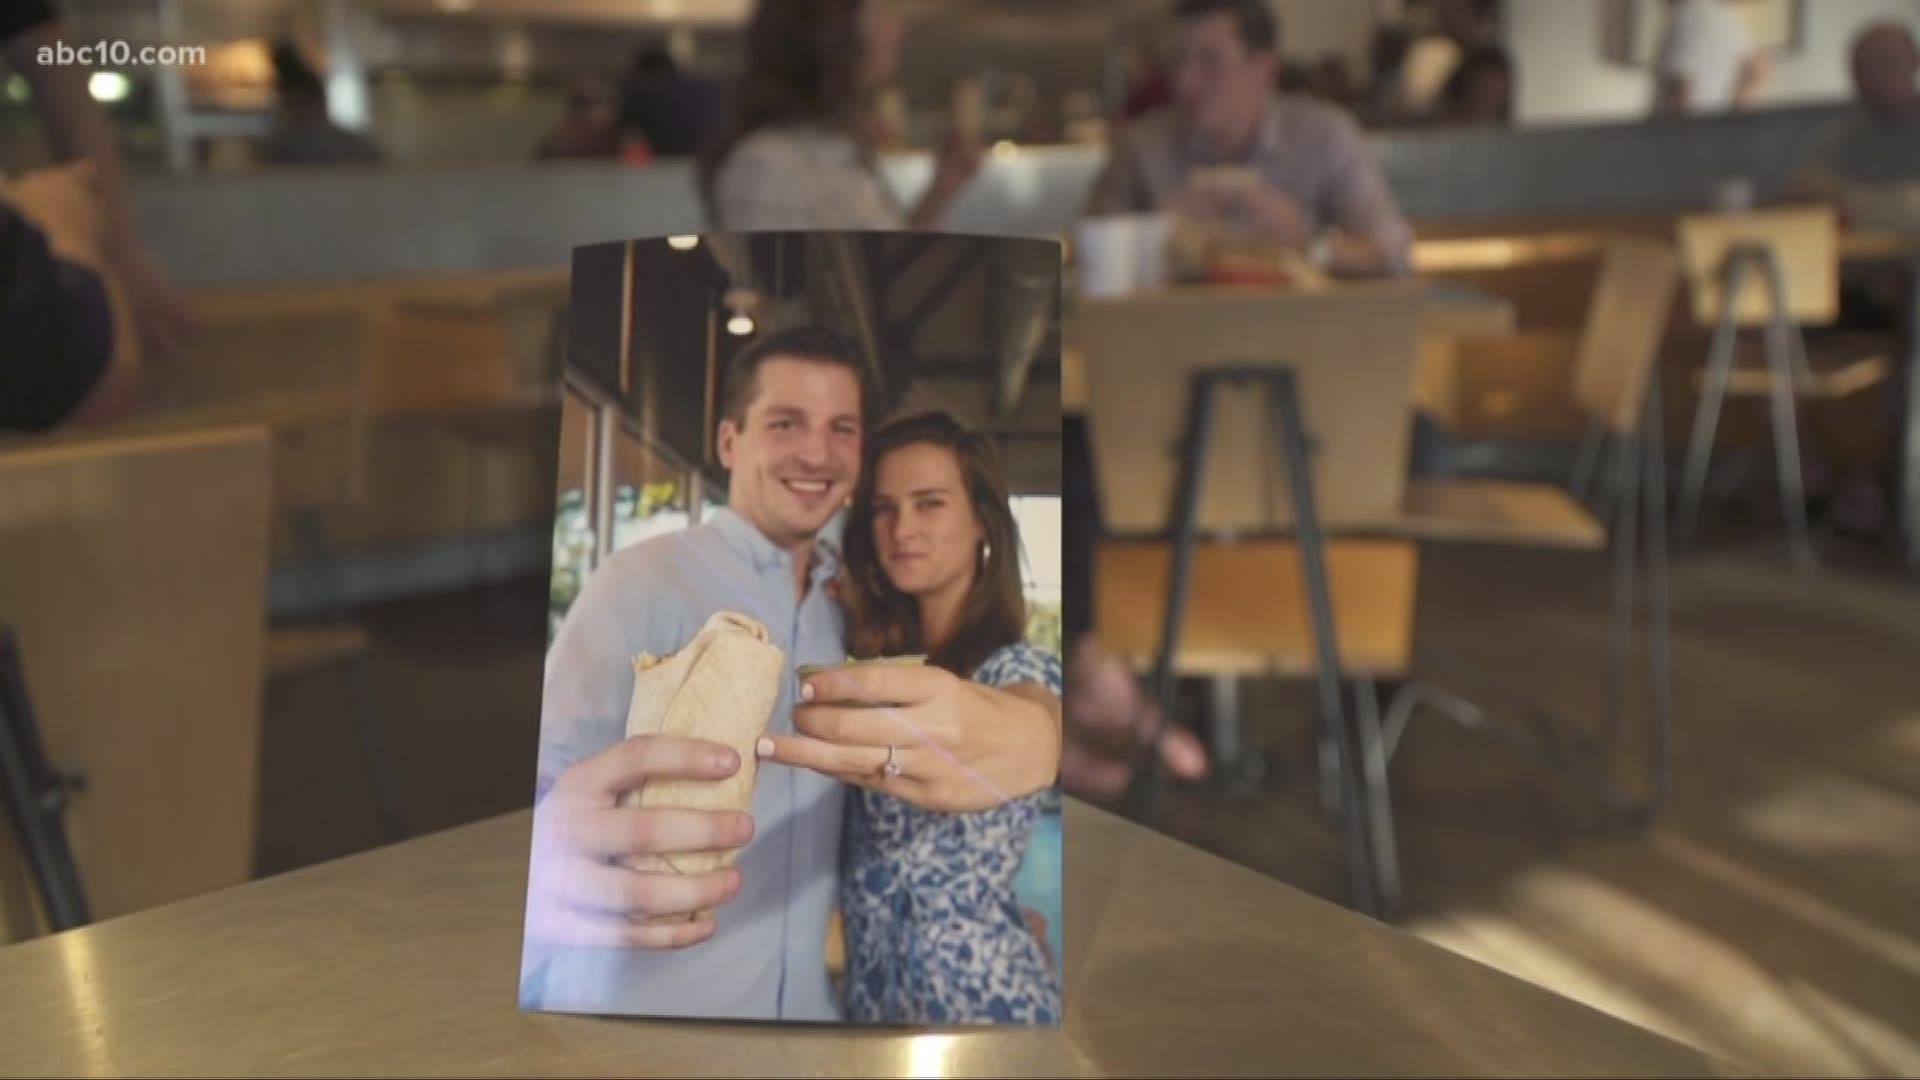 "Basically, Chipotle has been the foundation of our relationship for the past 12 years. It's our favorite spot."